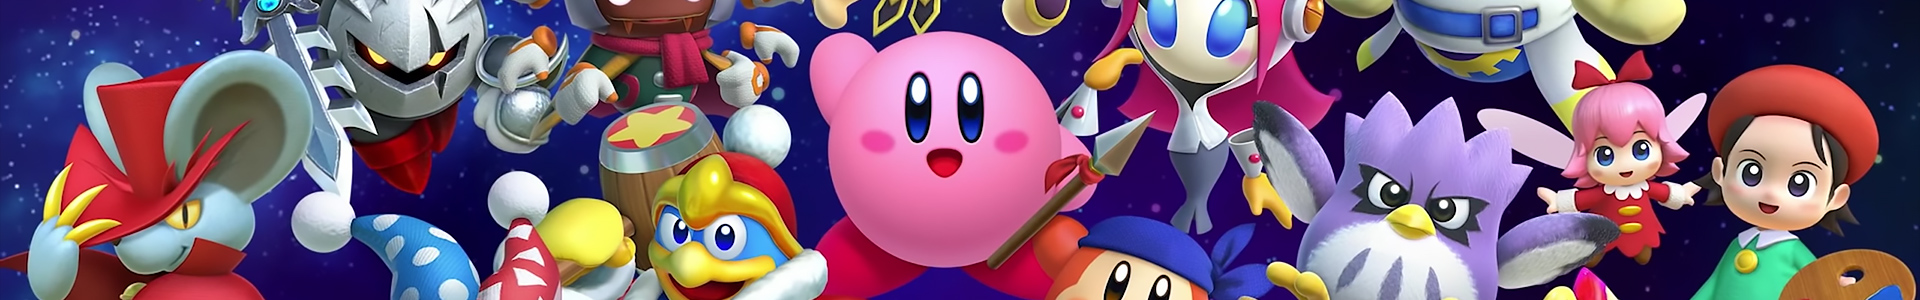 Banner media of Kirby Star Allies video game.